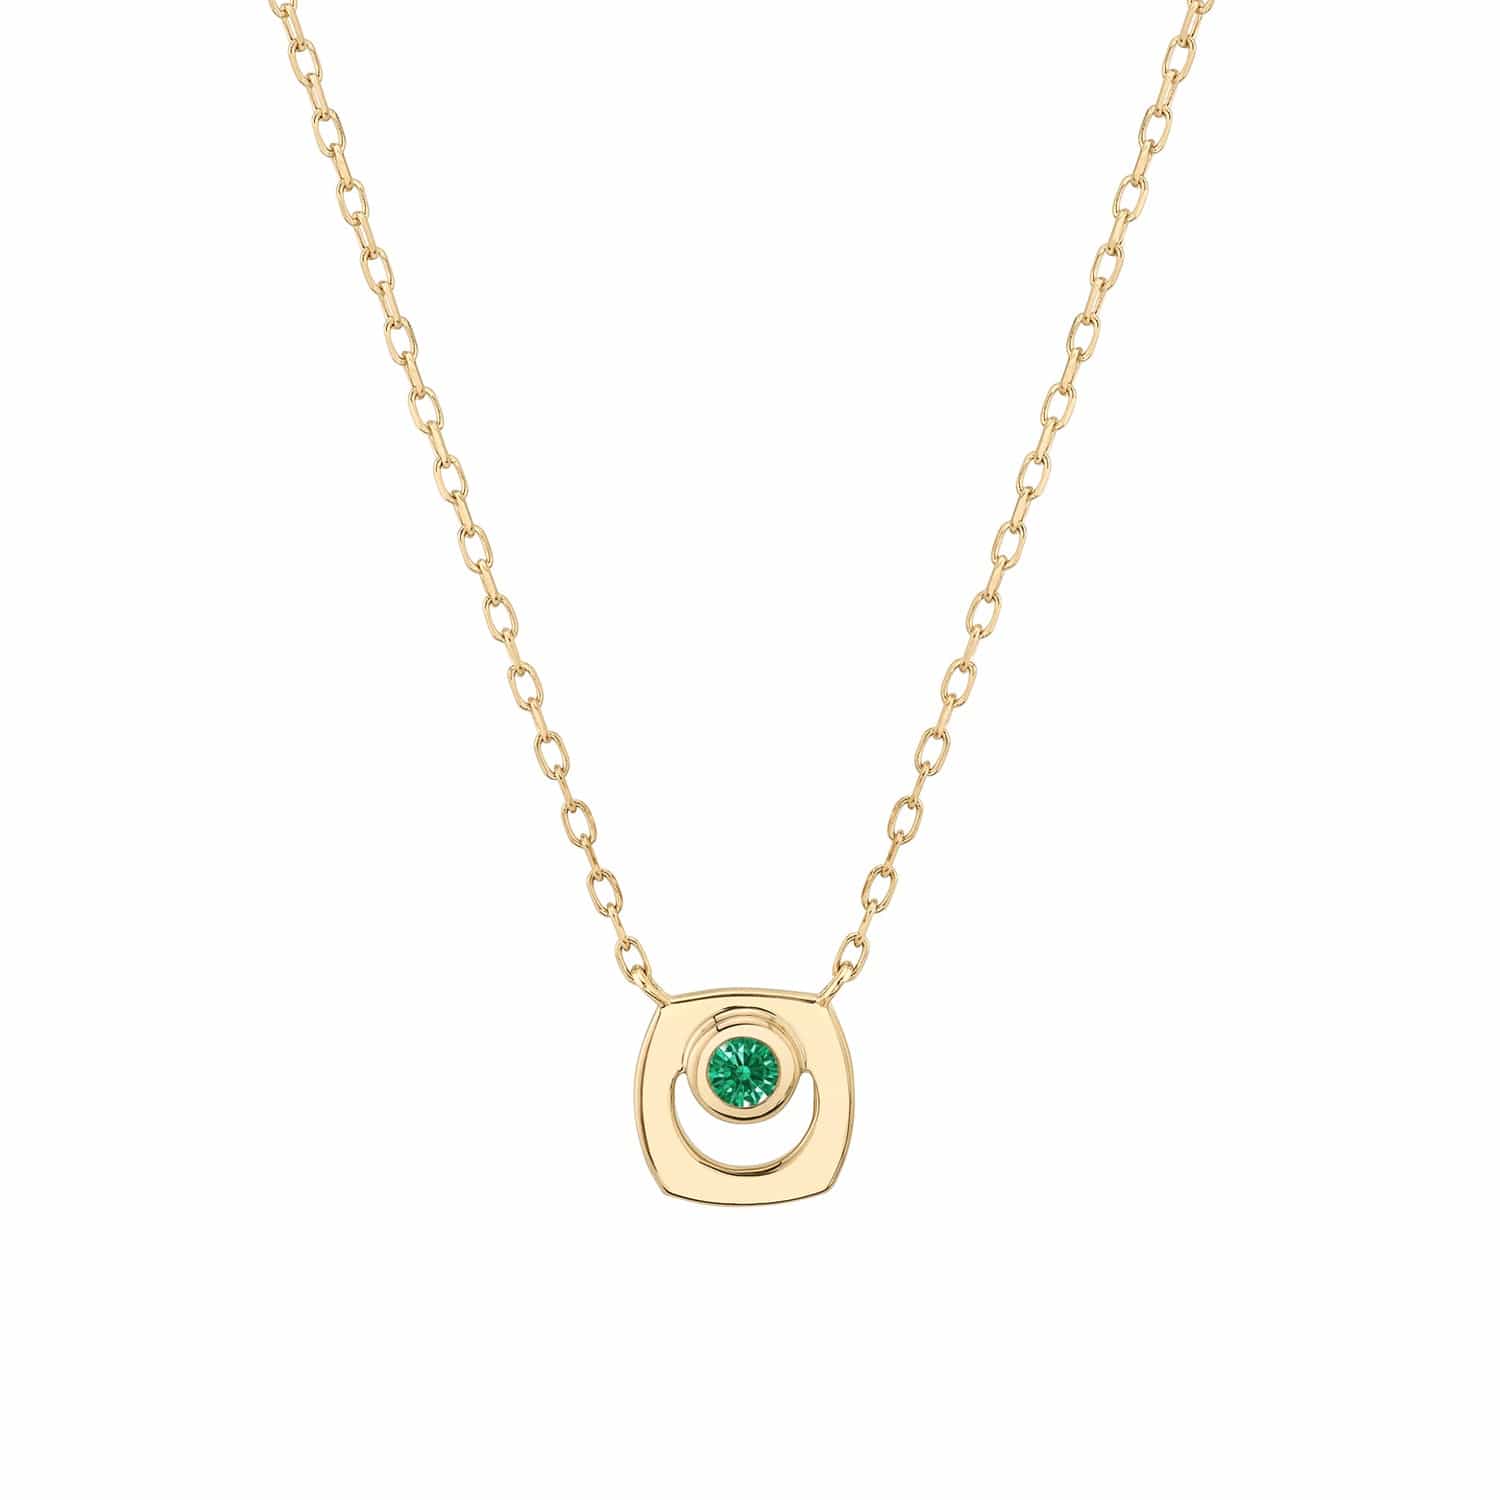 MICHAEL M Necklaces 14K Yellow Gold / Emerald - May Signature Birthstone Necklace CN435EM